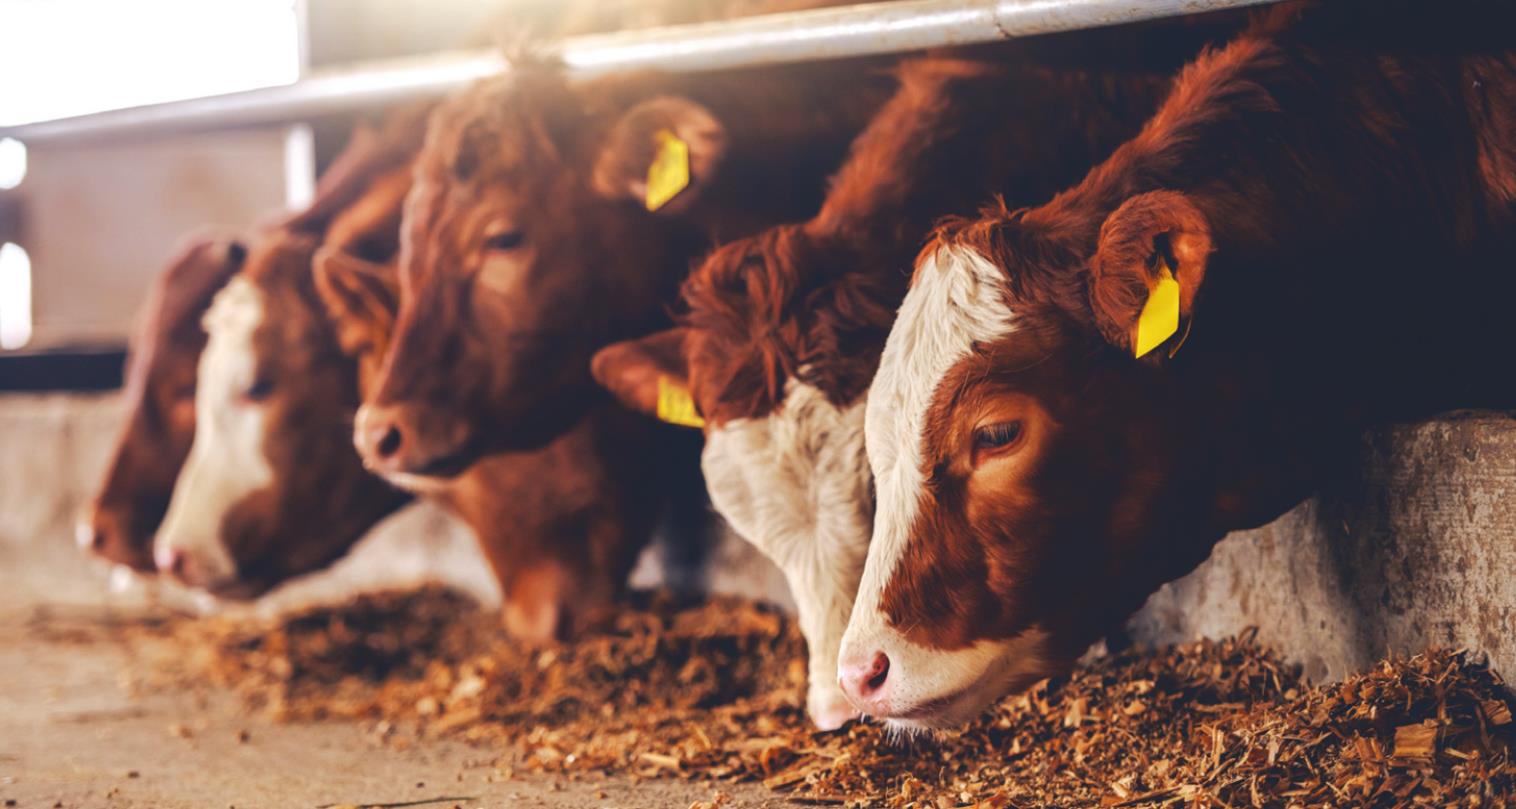 Cattle prices in the United States have been dropping but the cost of meat continues to rise. Local farmer Lawrence Sawatzky said the problem has to do with a lack of small, local meat processing companies in the marketplace. Provided